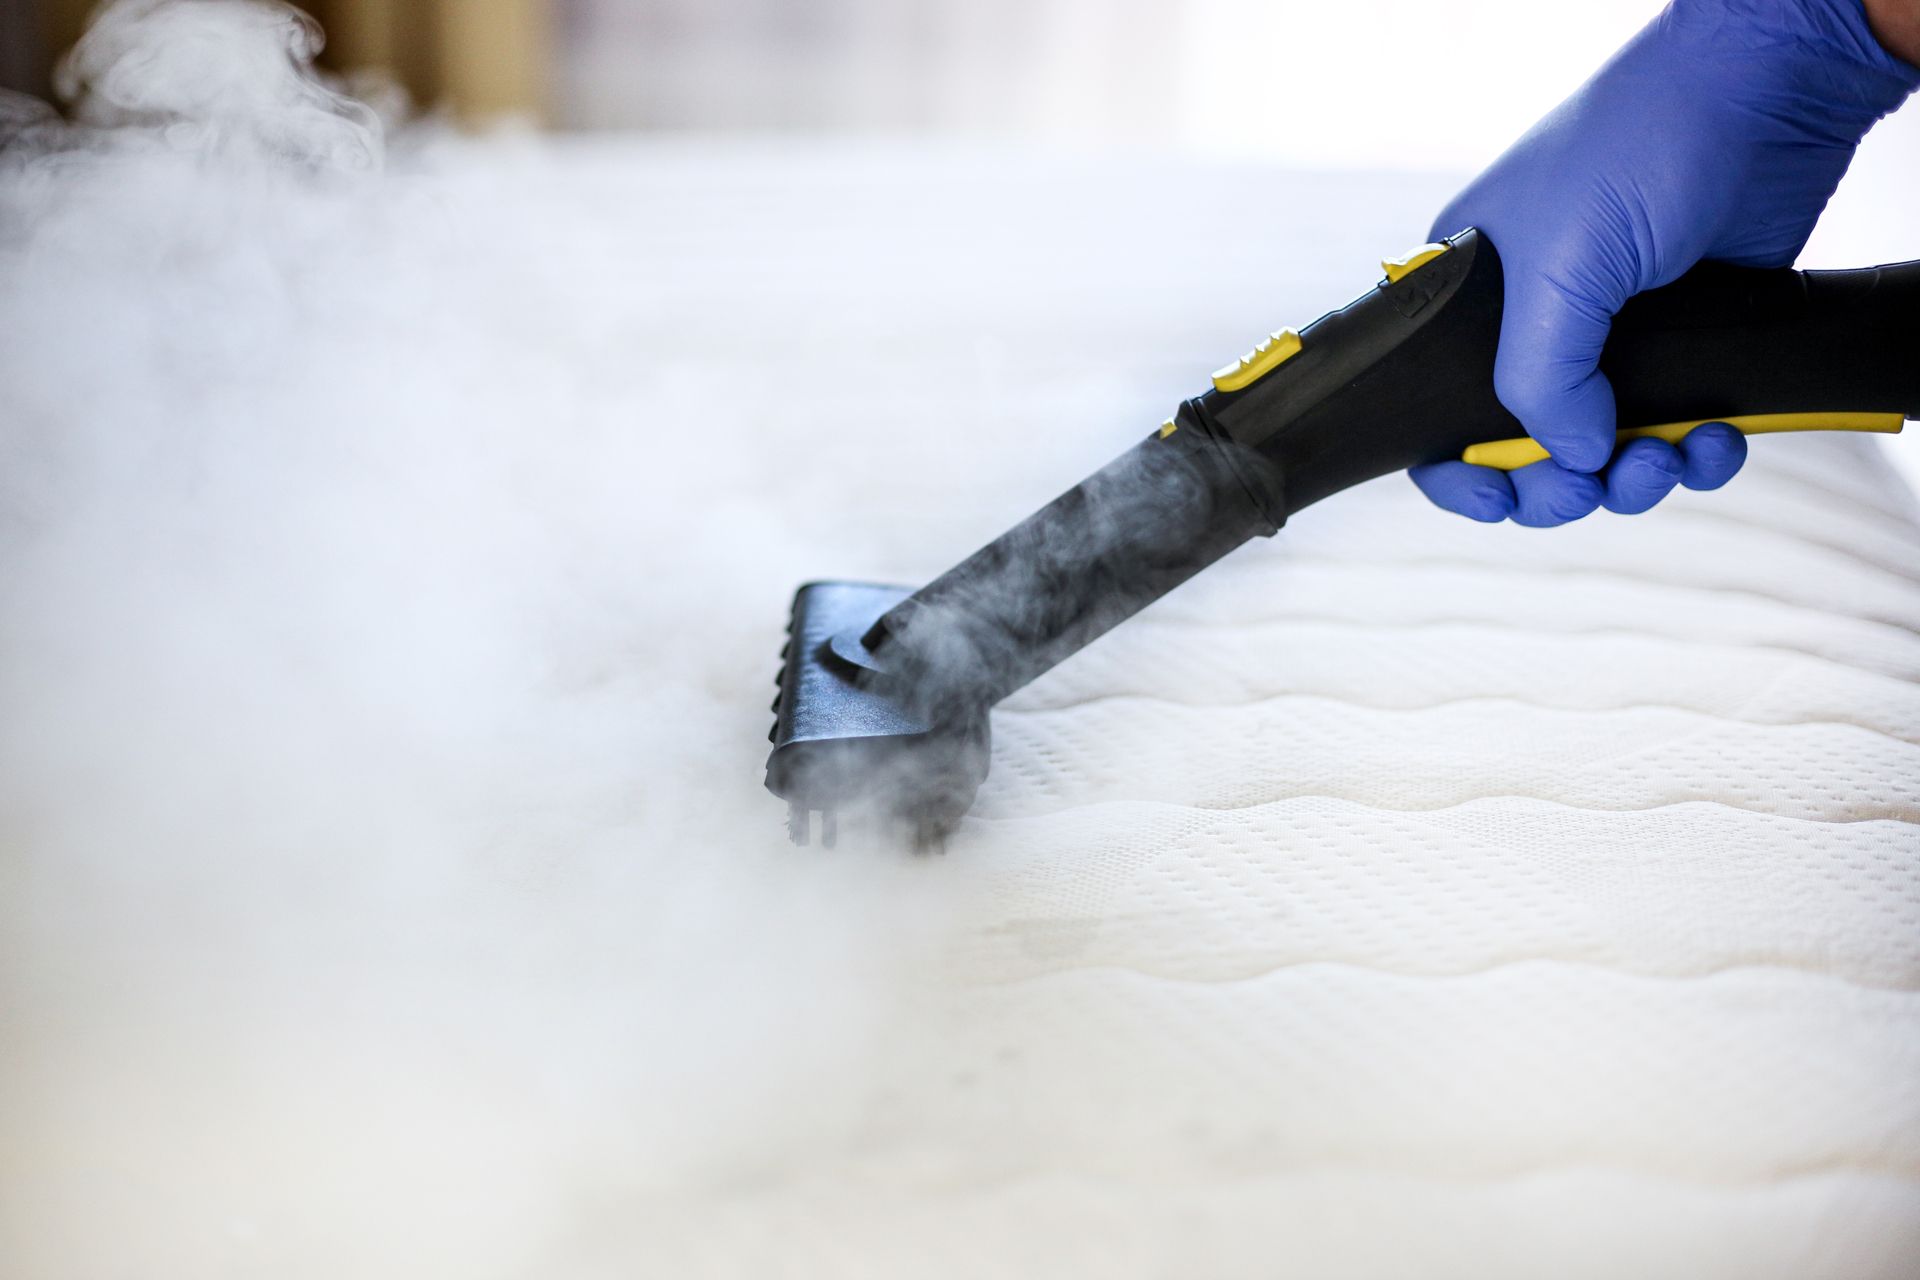 a person is cleaning a mattress with a steam cleaner